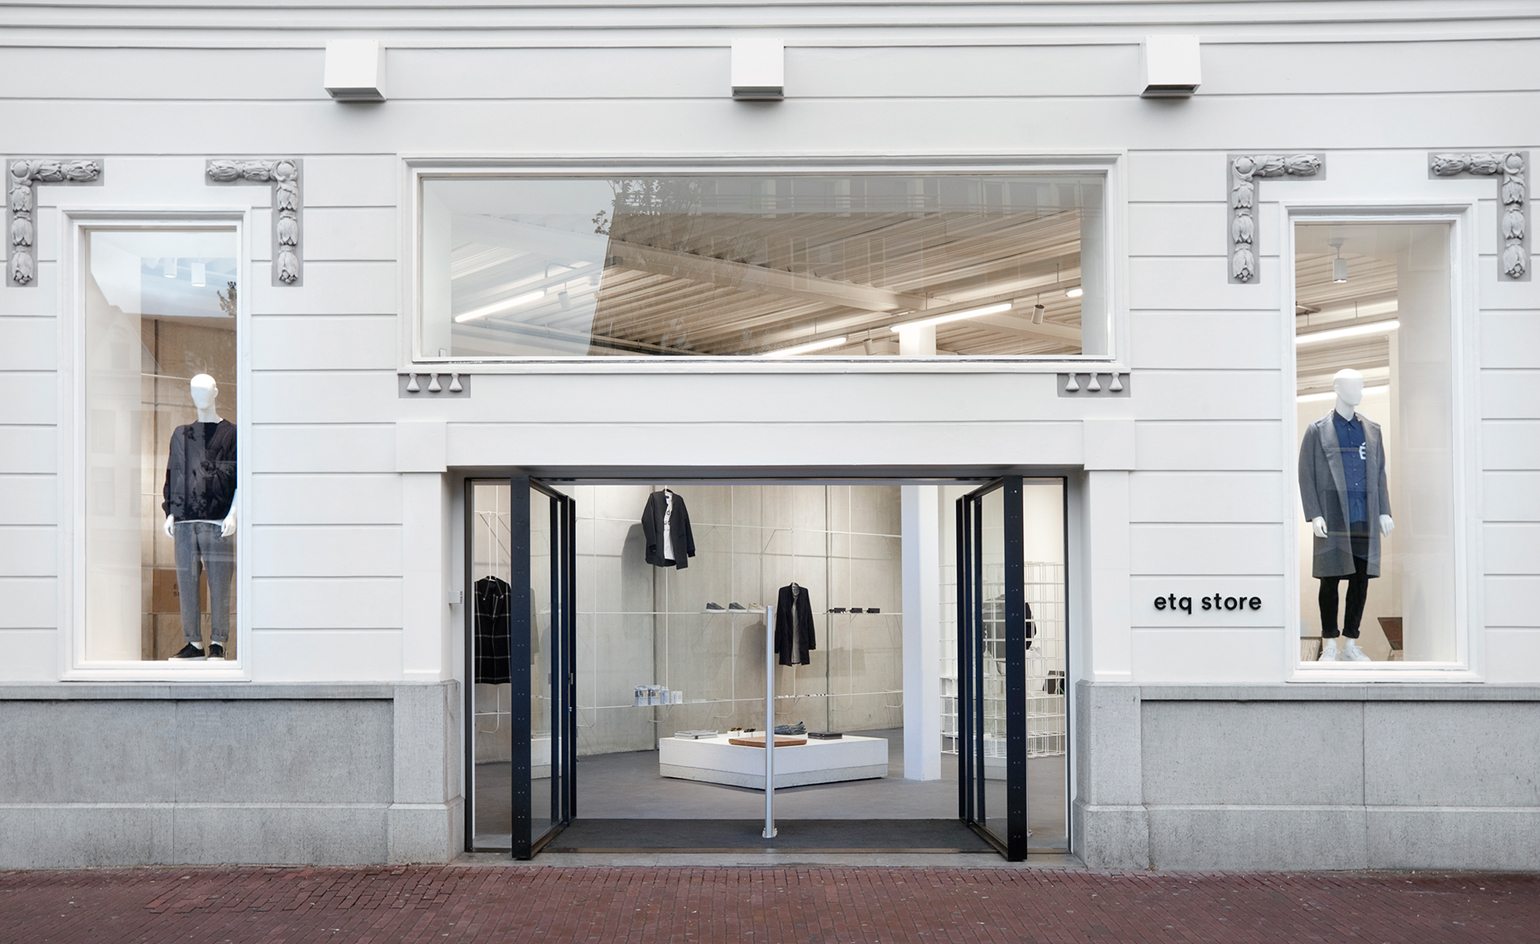 ETQ flagship store opens in Amsterdam | Wallpaper